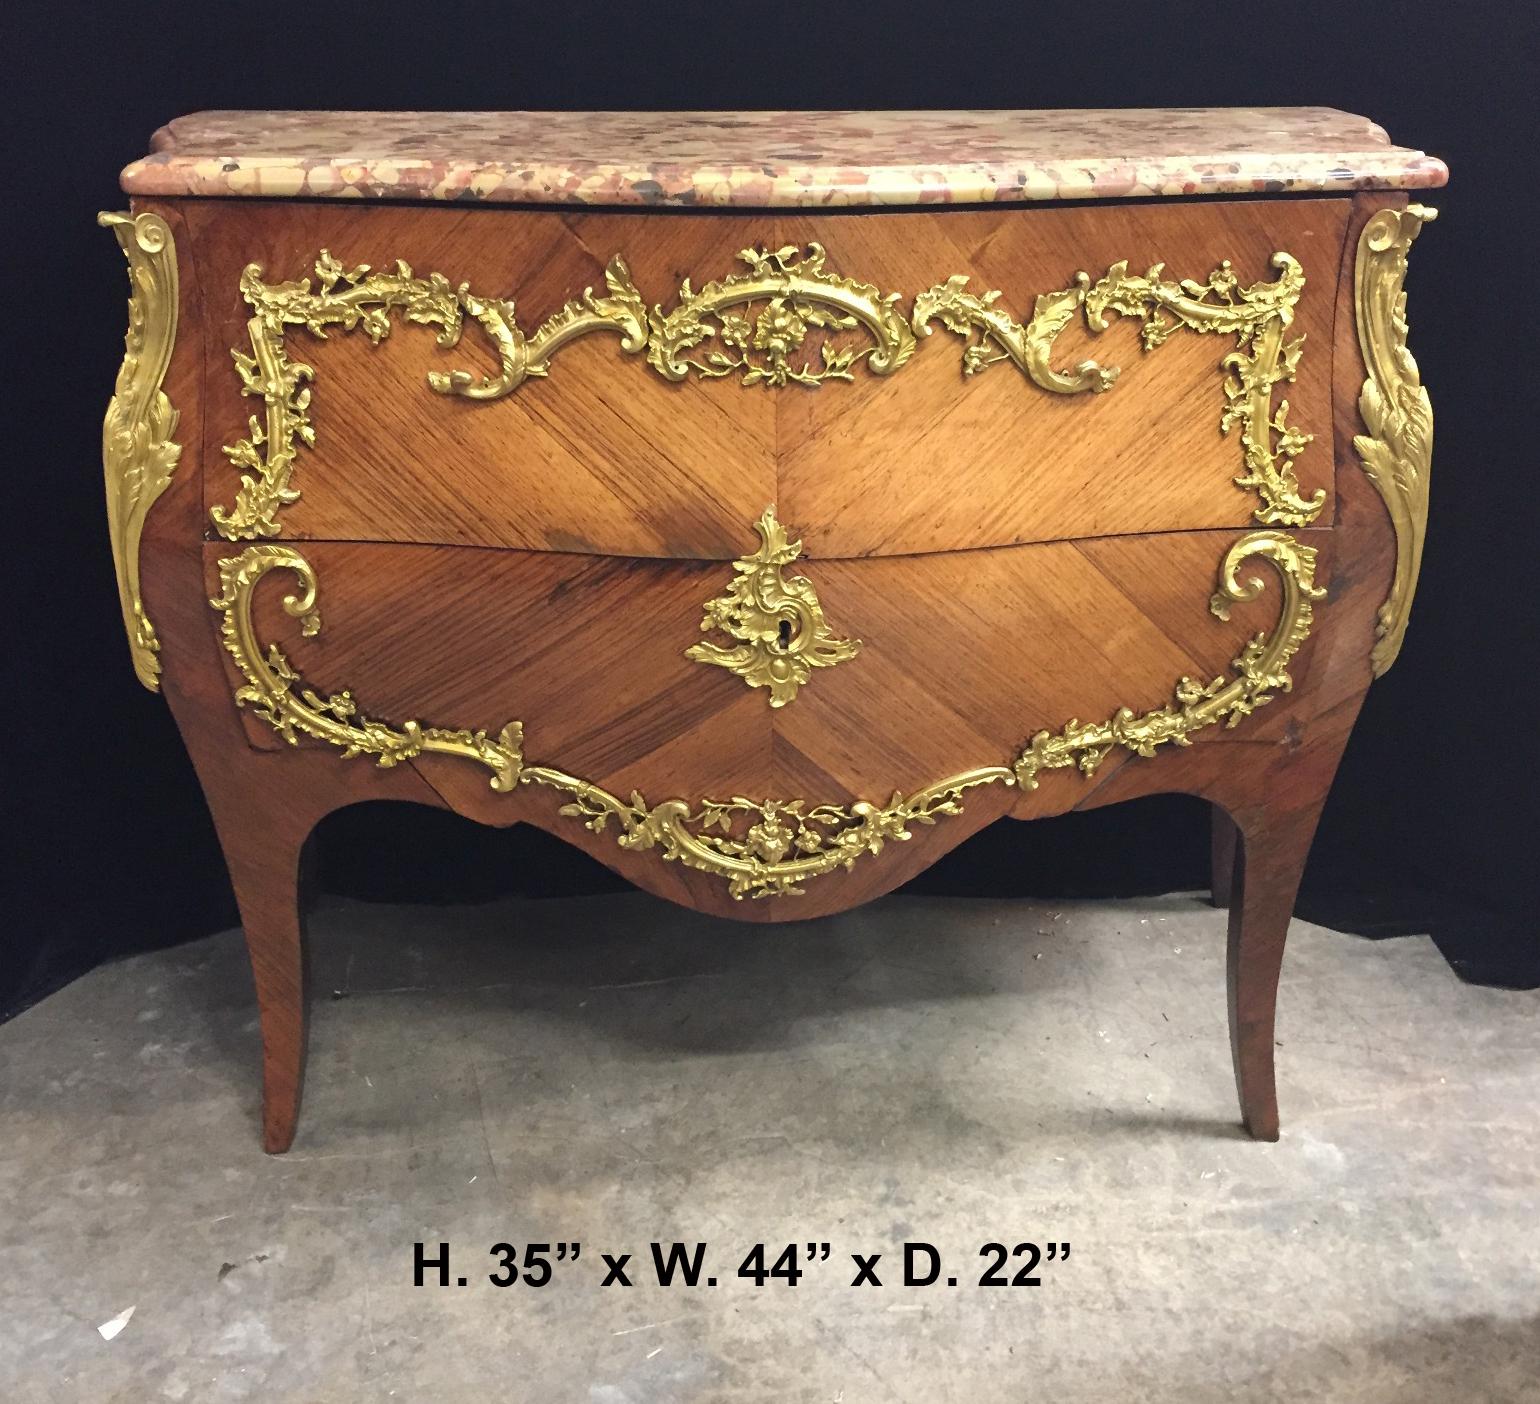 Exquisite 19th century French Louis XV style bronze-mounted commode with marble top. Signed JVHD on bronze mounts.
The serpentine-fronted mottled Breche d'Alep marble top is over two long kingwood veneered drawers mounted with scrolled ormolu